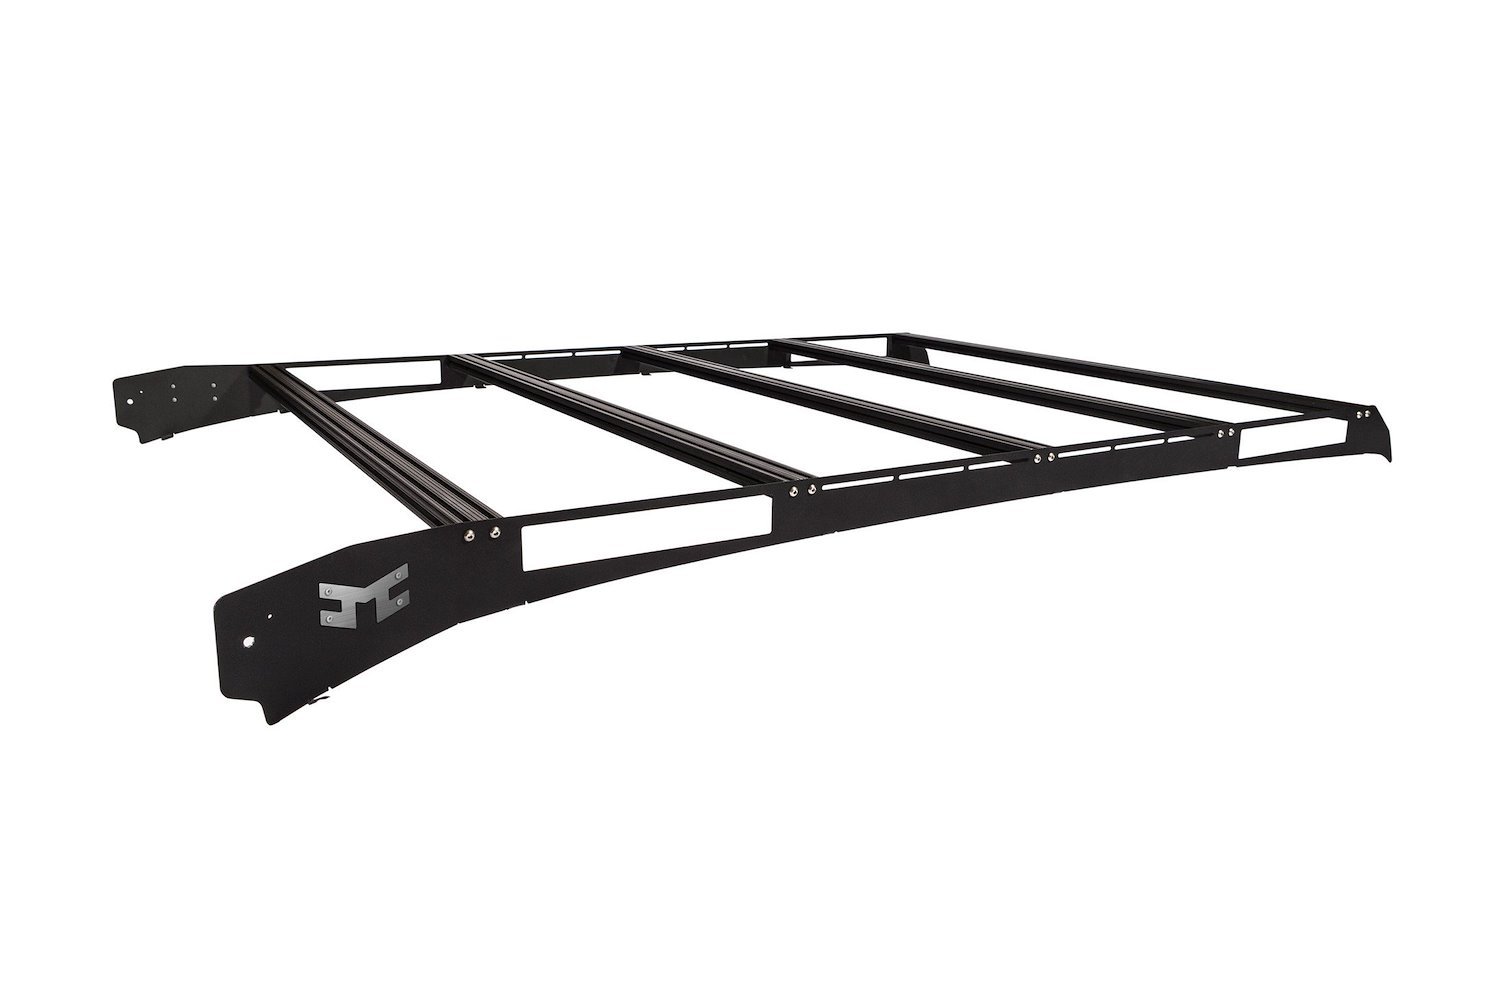 Performance Roof Rack for 1999-2016 Ford F-250/350/450 SuperDuty Extended Cab Trucks